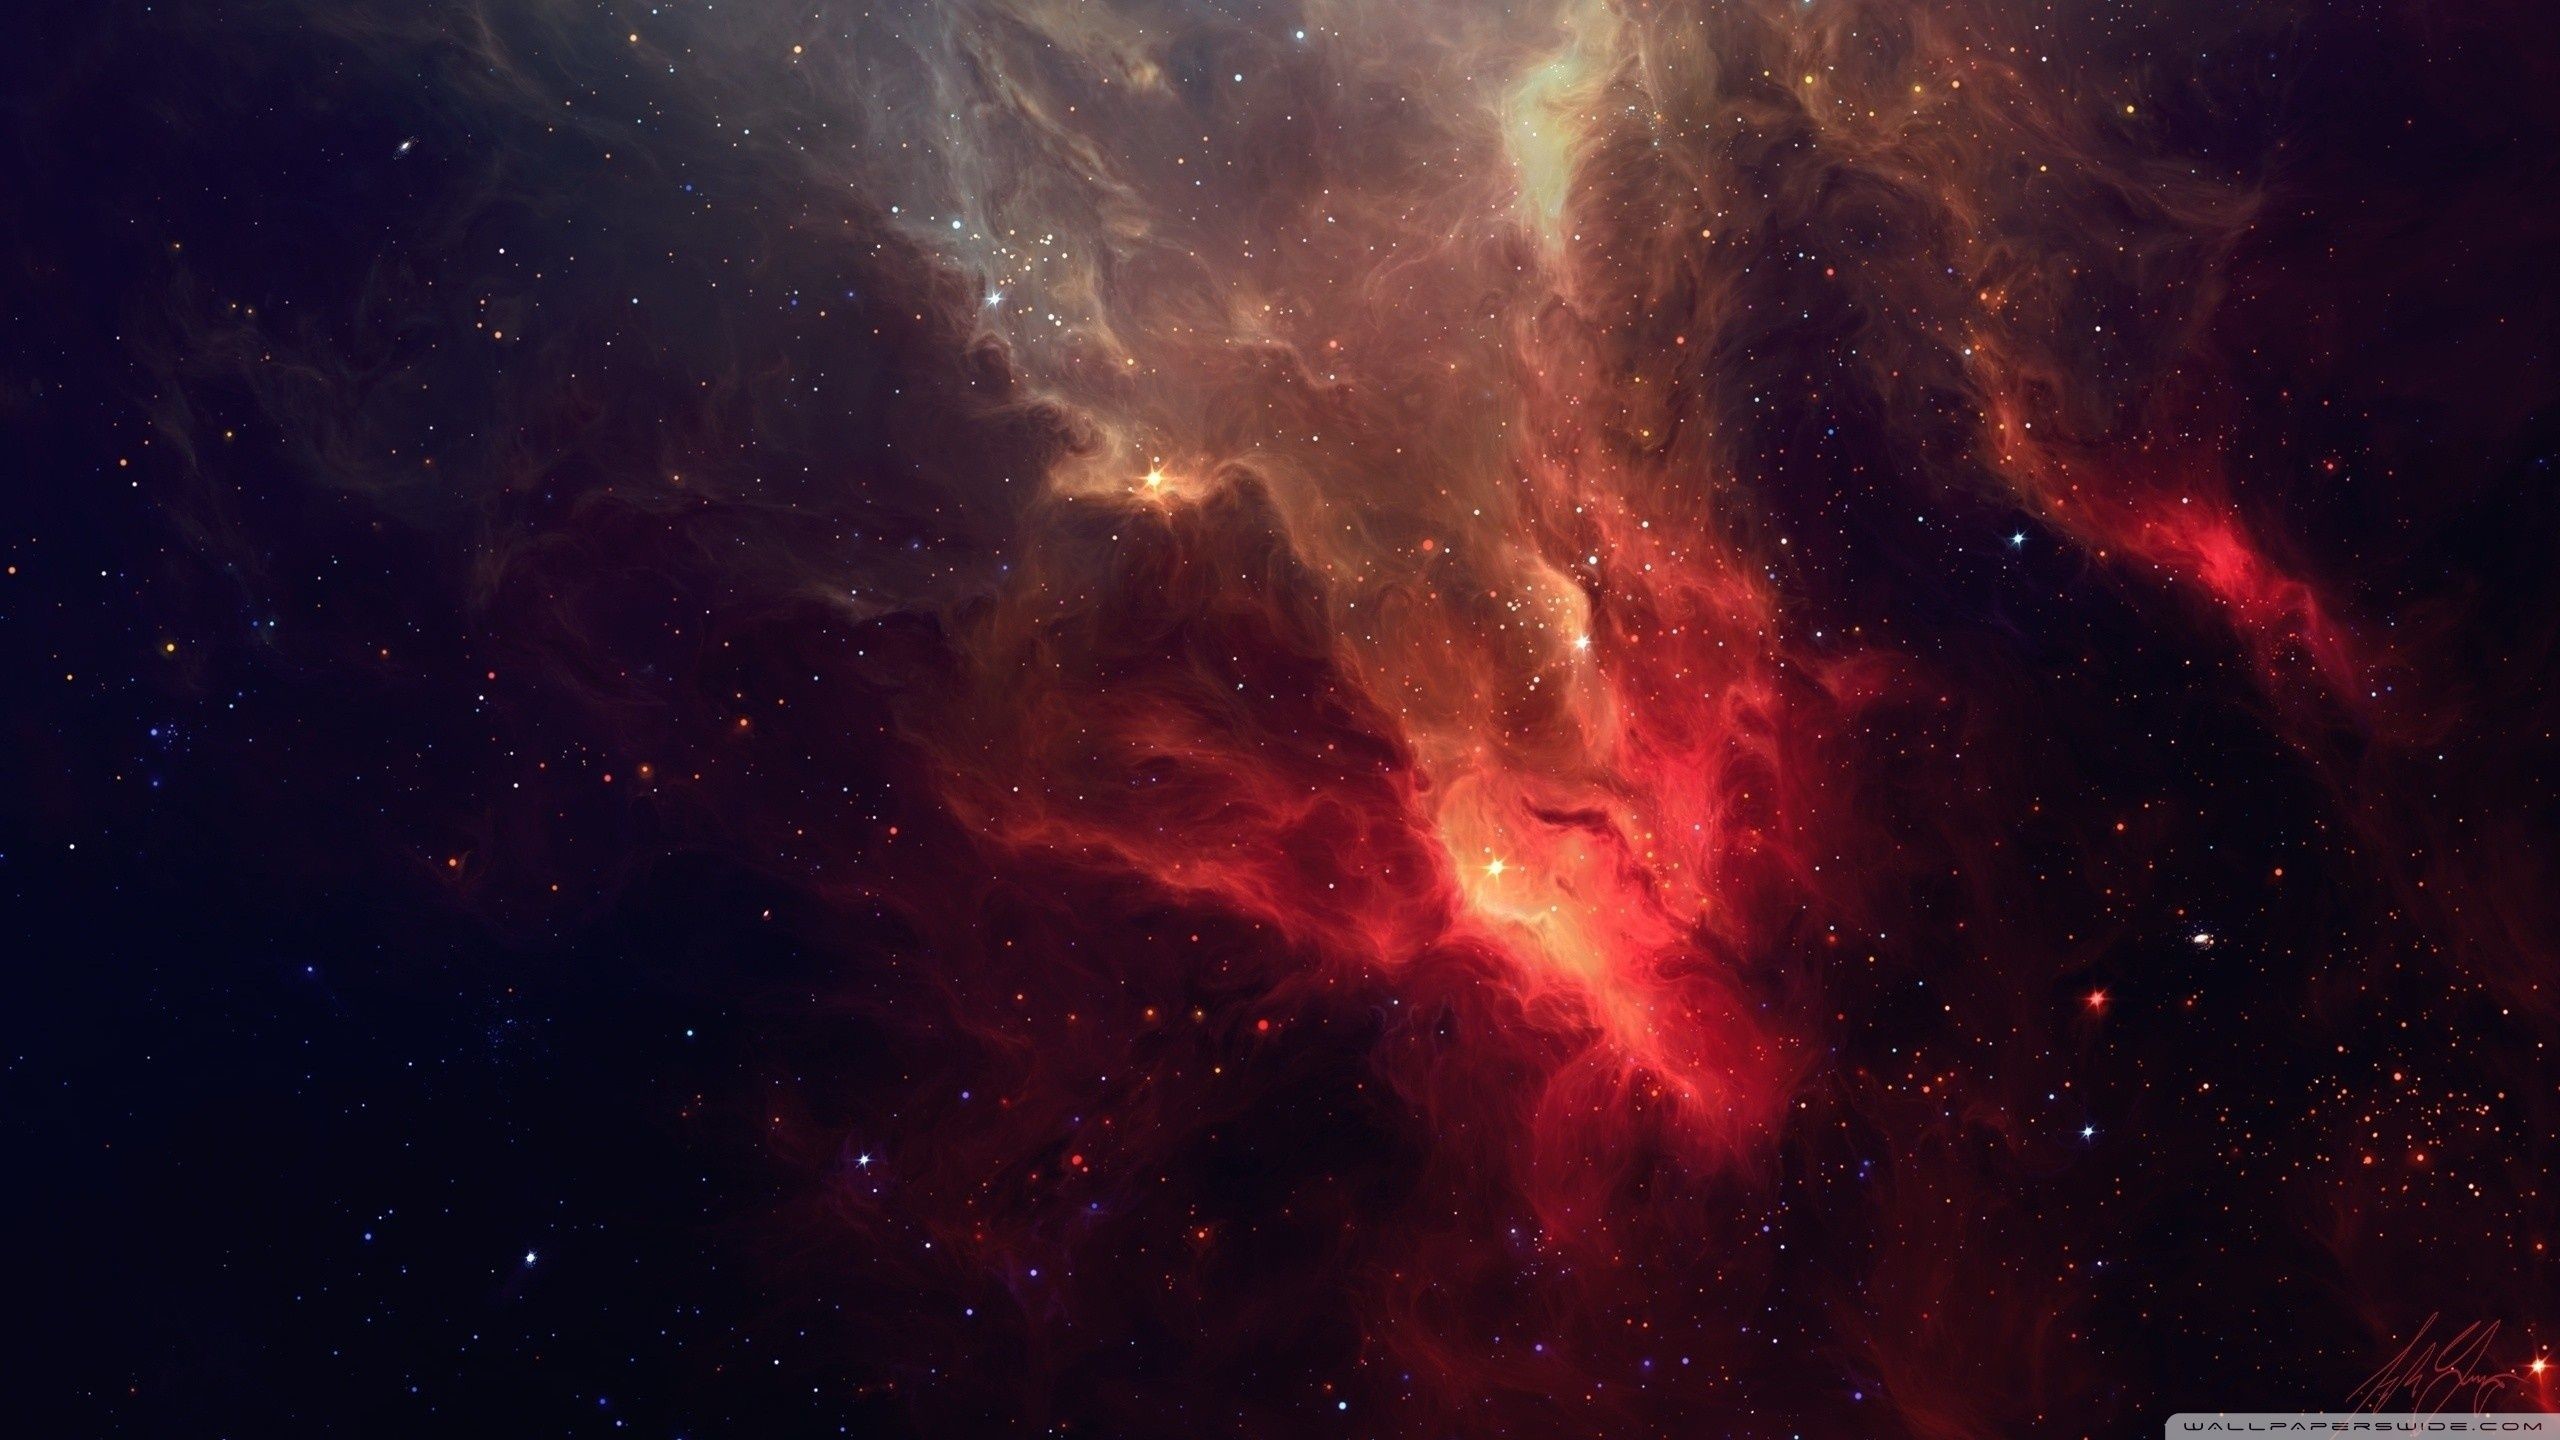 2560x1440 space wallpapers hd Archives - Free wallpaper full hd 1080p, ...